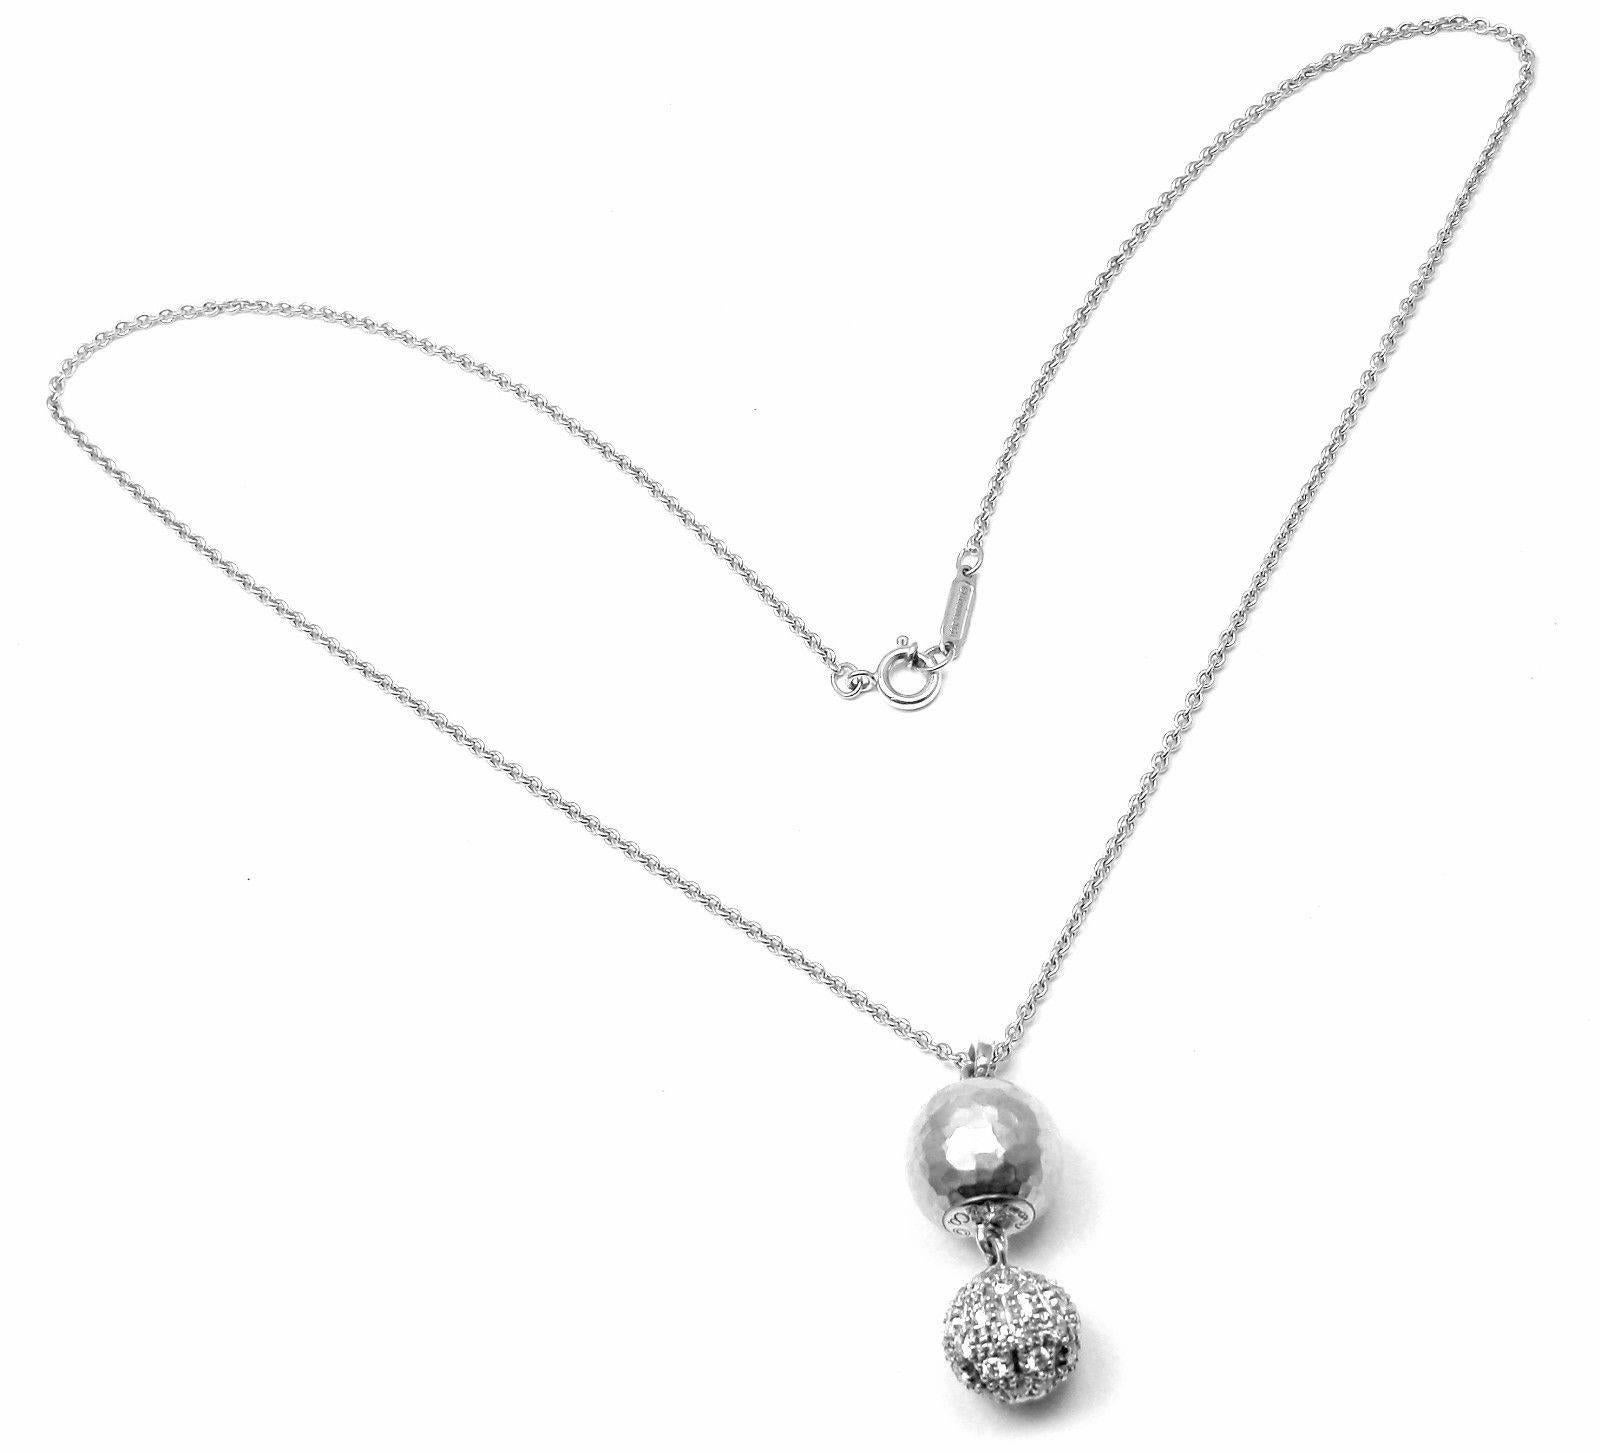 18k White Gold Diamond Pendant Necklace by Paloma Picasso for 
Tiffany & Co. 
With 40 round brilliant cut diamonds VS1 clarity, G color total weight 
approx. 1ct

Details: 
Length: 16